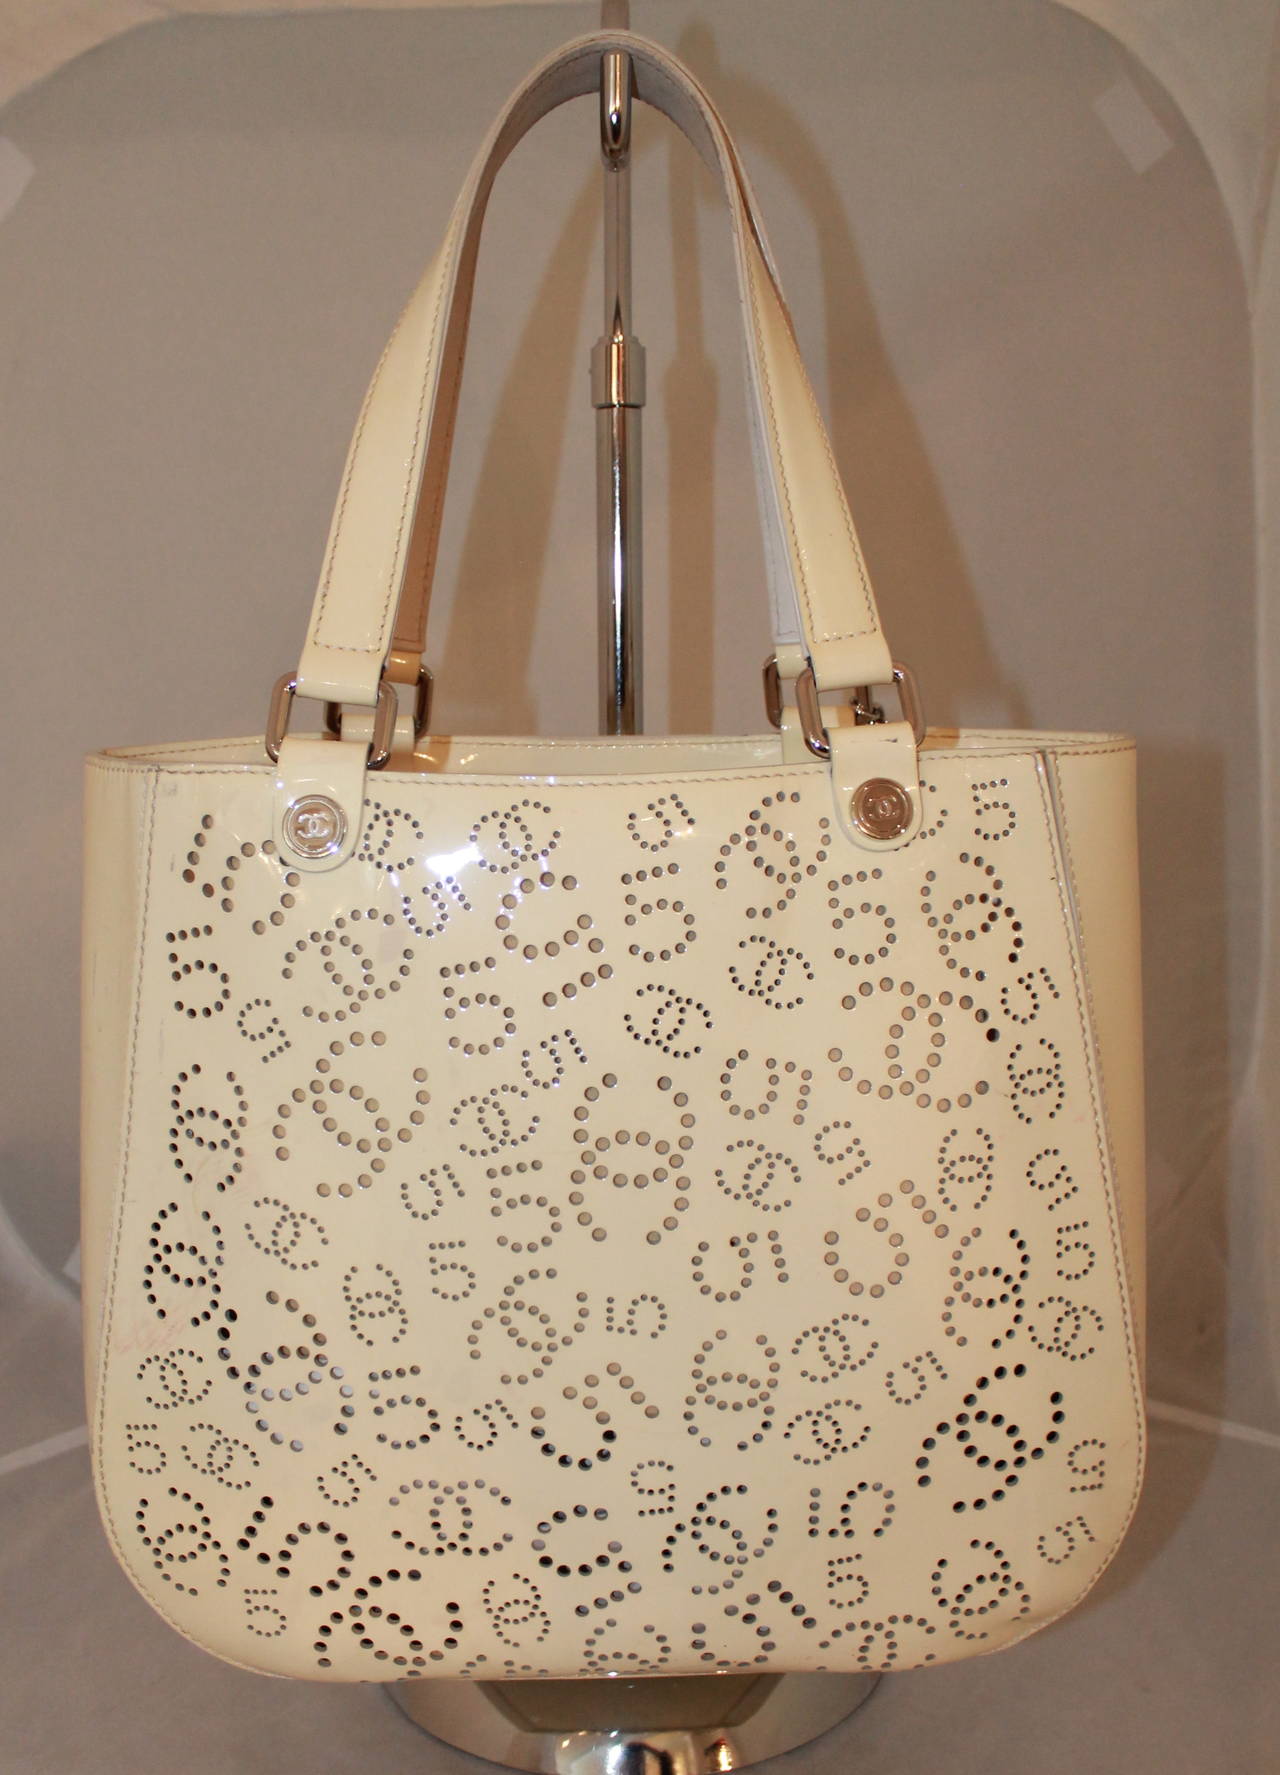 Chanel Ivory Perforated Patent Tote. This tote is in good condition with noticeable markings on the sides of the bag. It comes with an authenticity card.

Measurements:
Length- 11.5